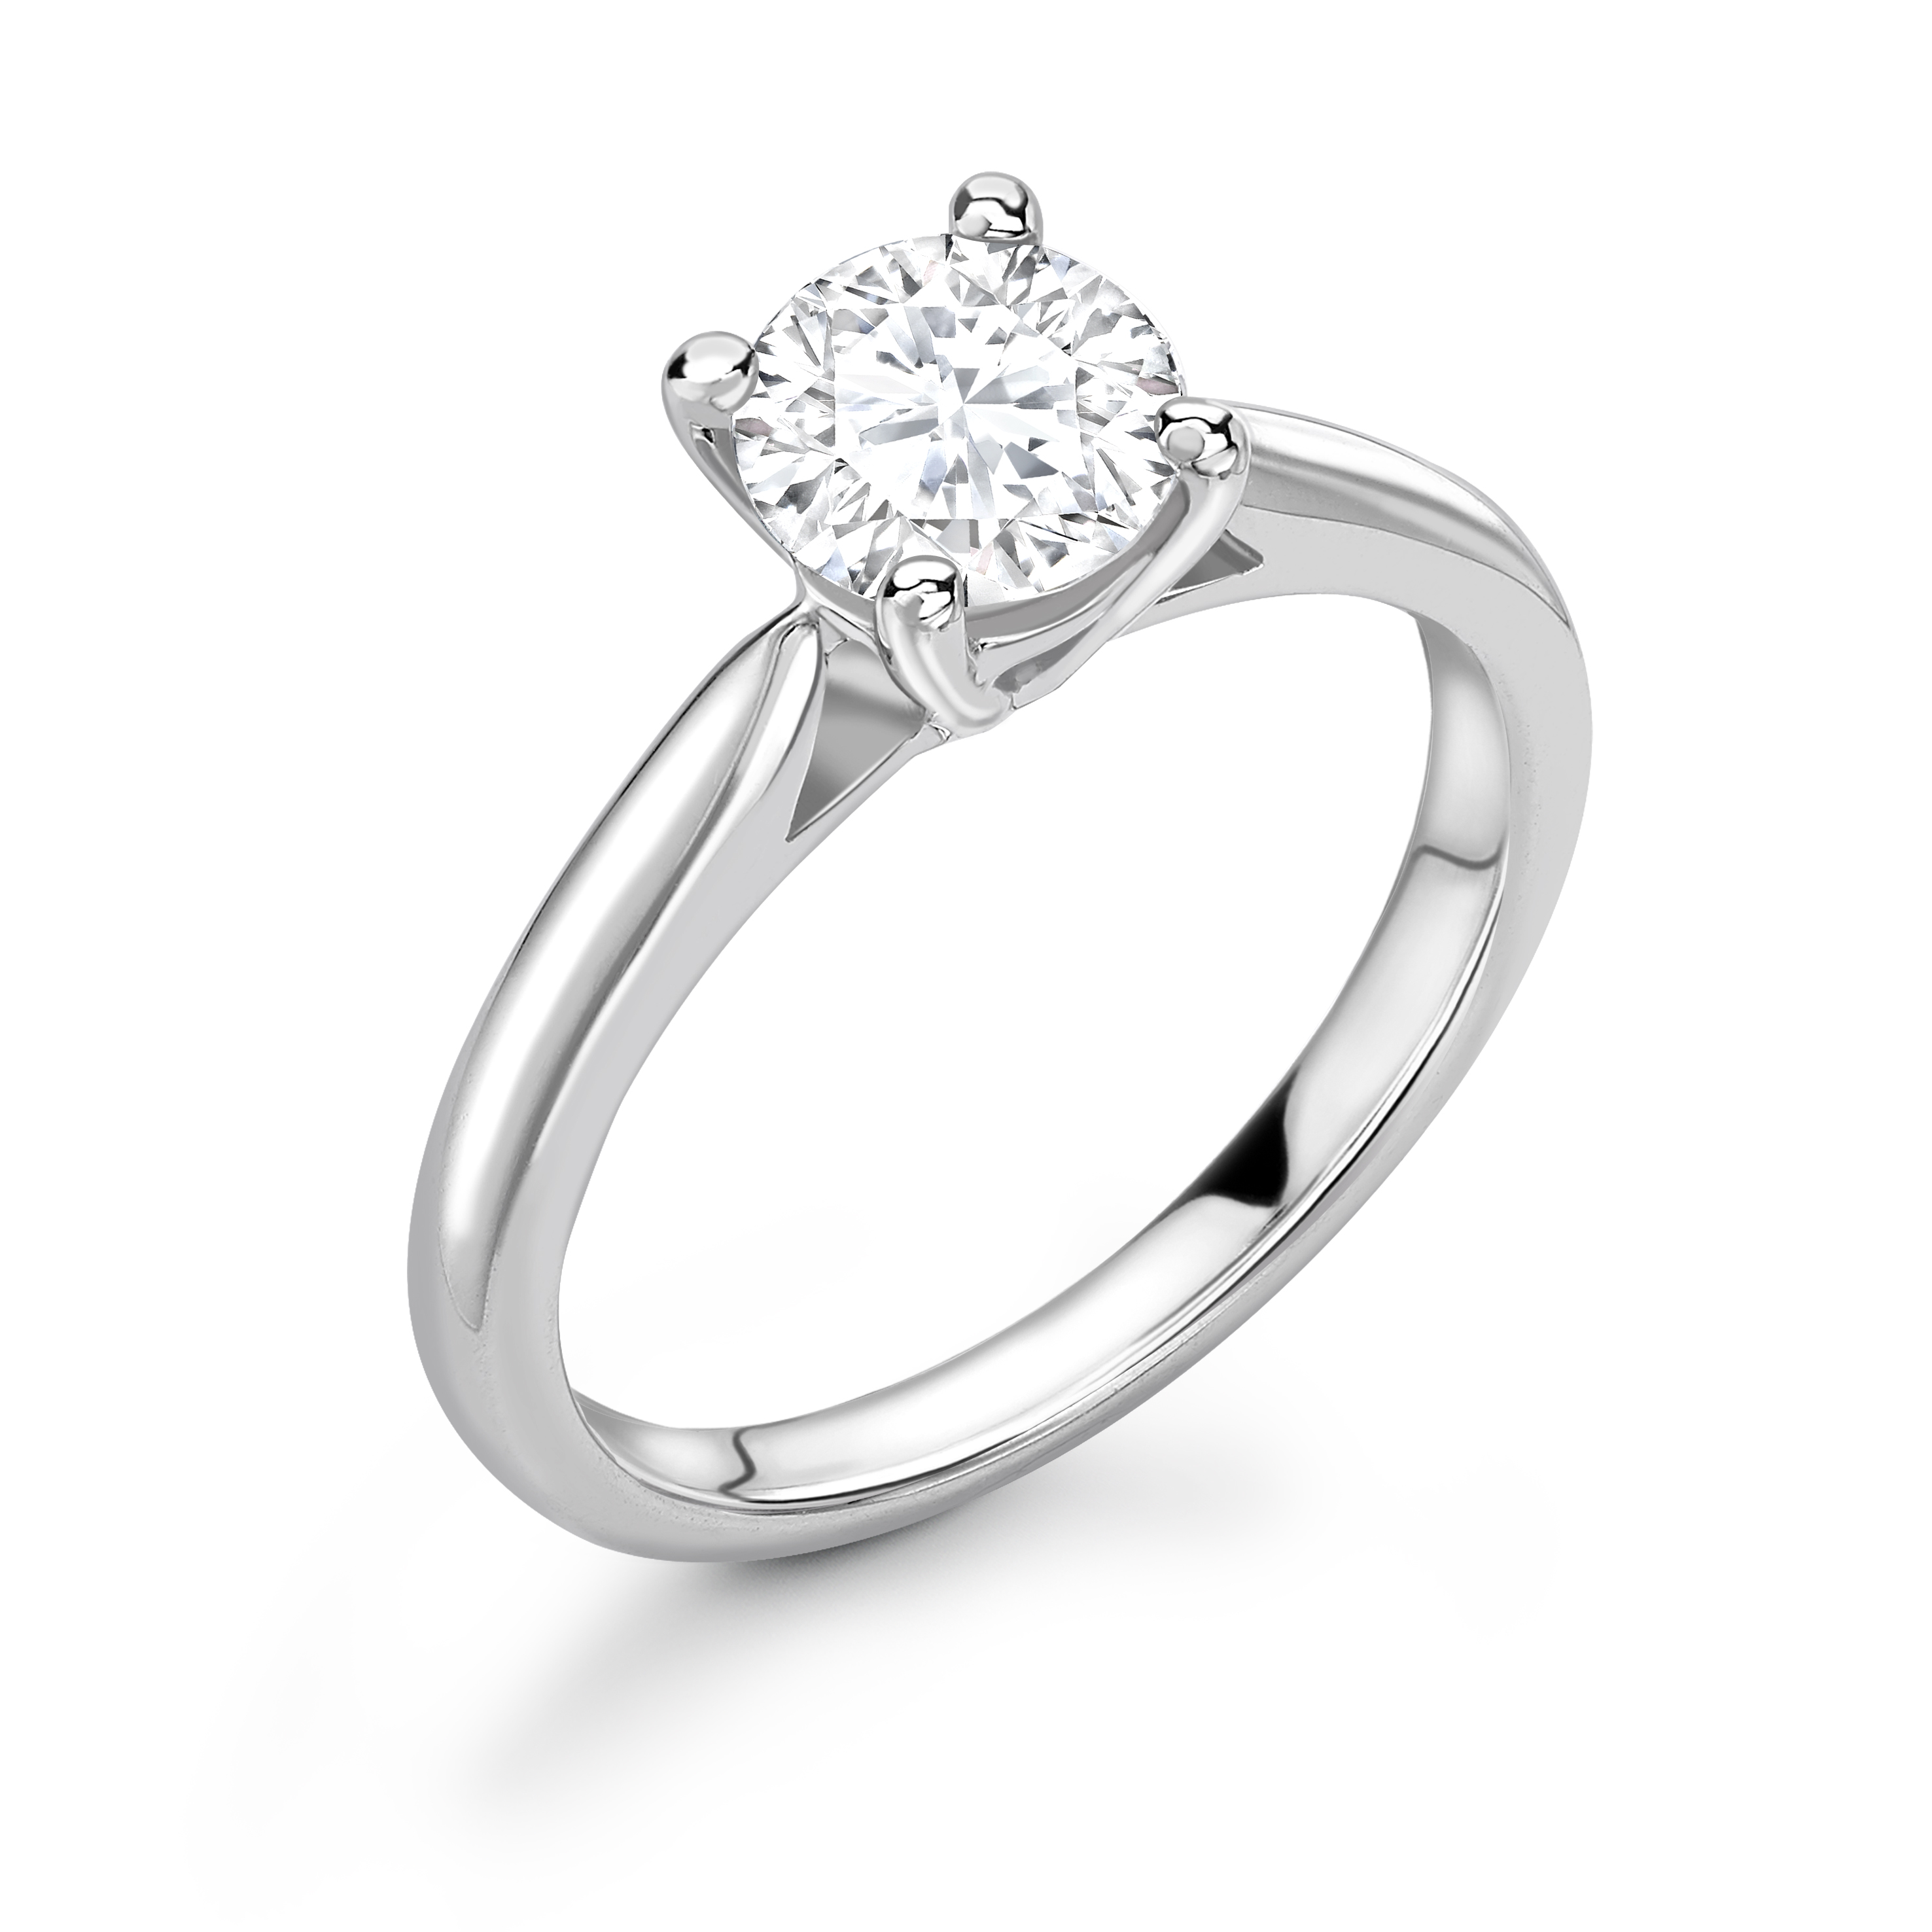 18ct White Gold Claw Set Diamond Ring 0.50 Carats